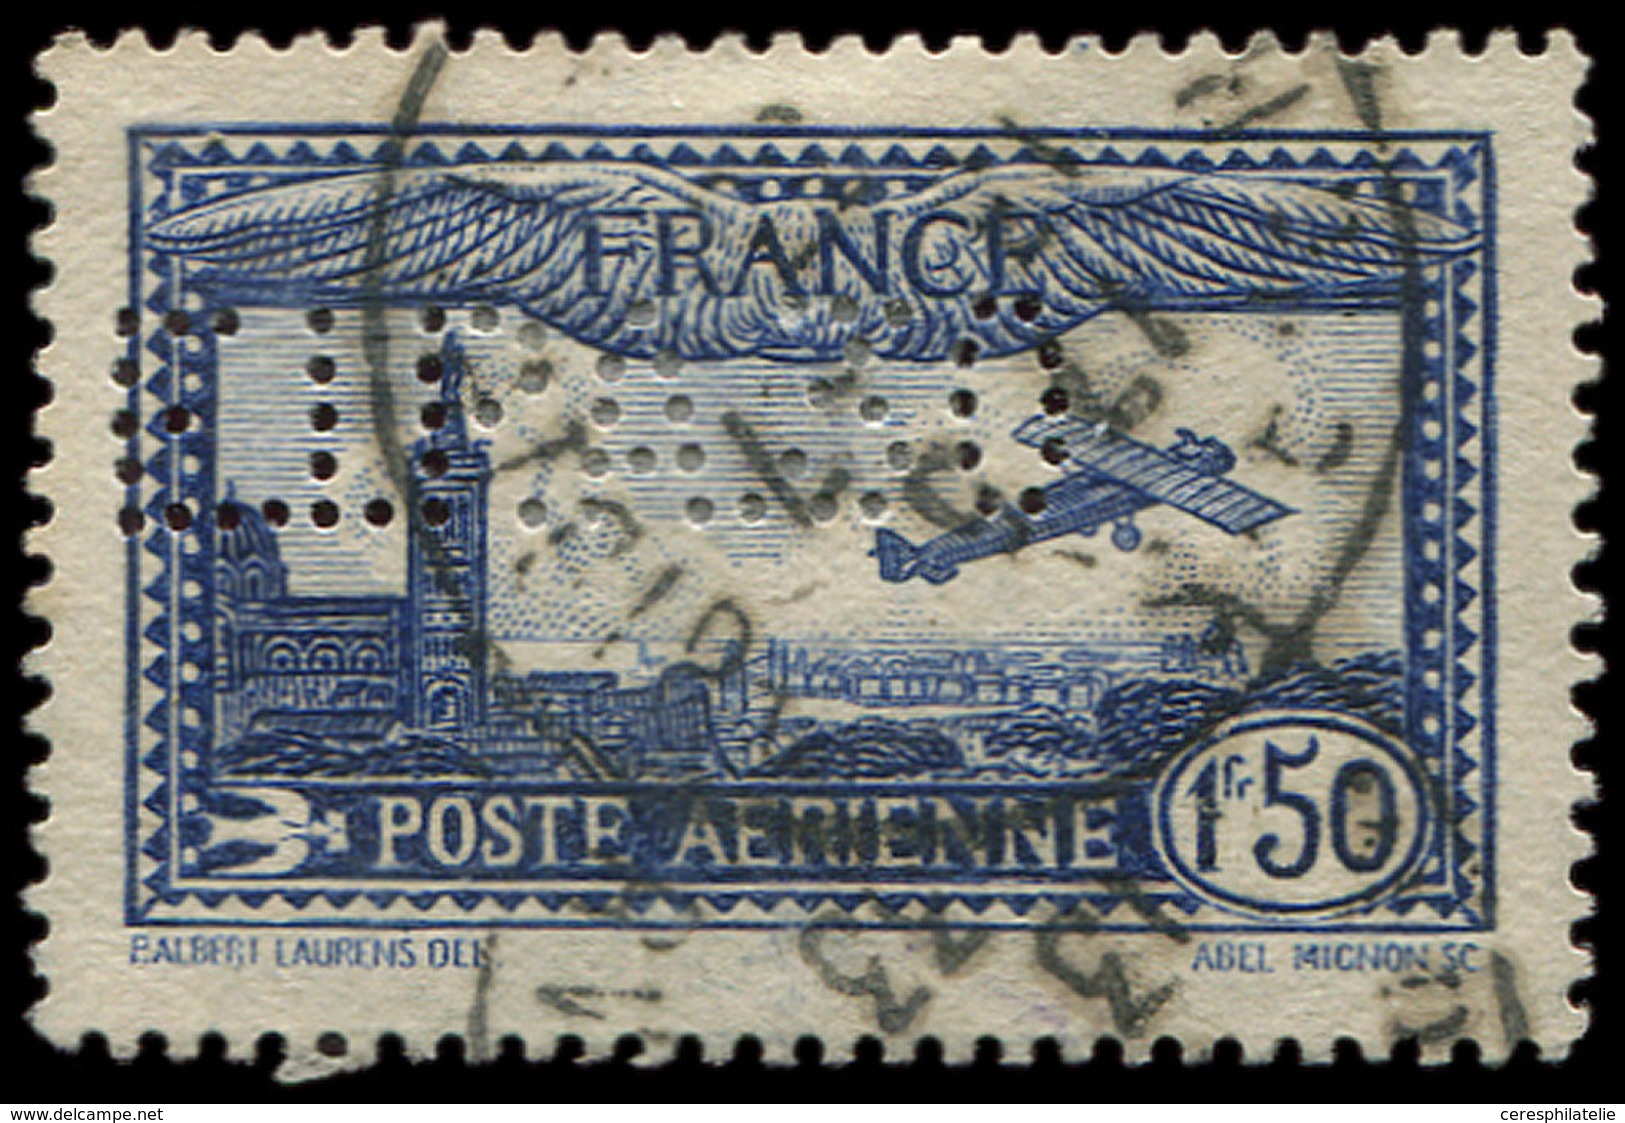 POSTE AERIENNE 6c  1f.50 Outremer, E.I.P.A. 30, Obl., TB. C - 1927-1959 Mint/hinged